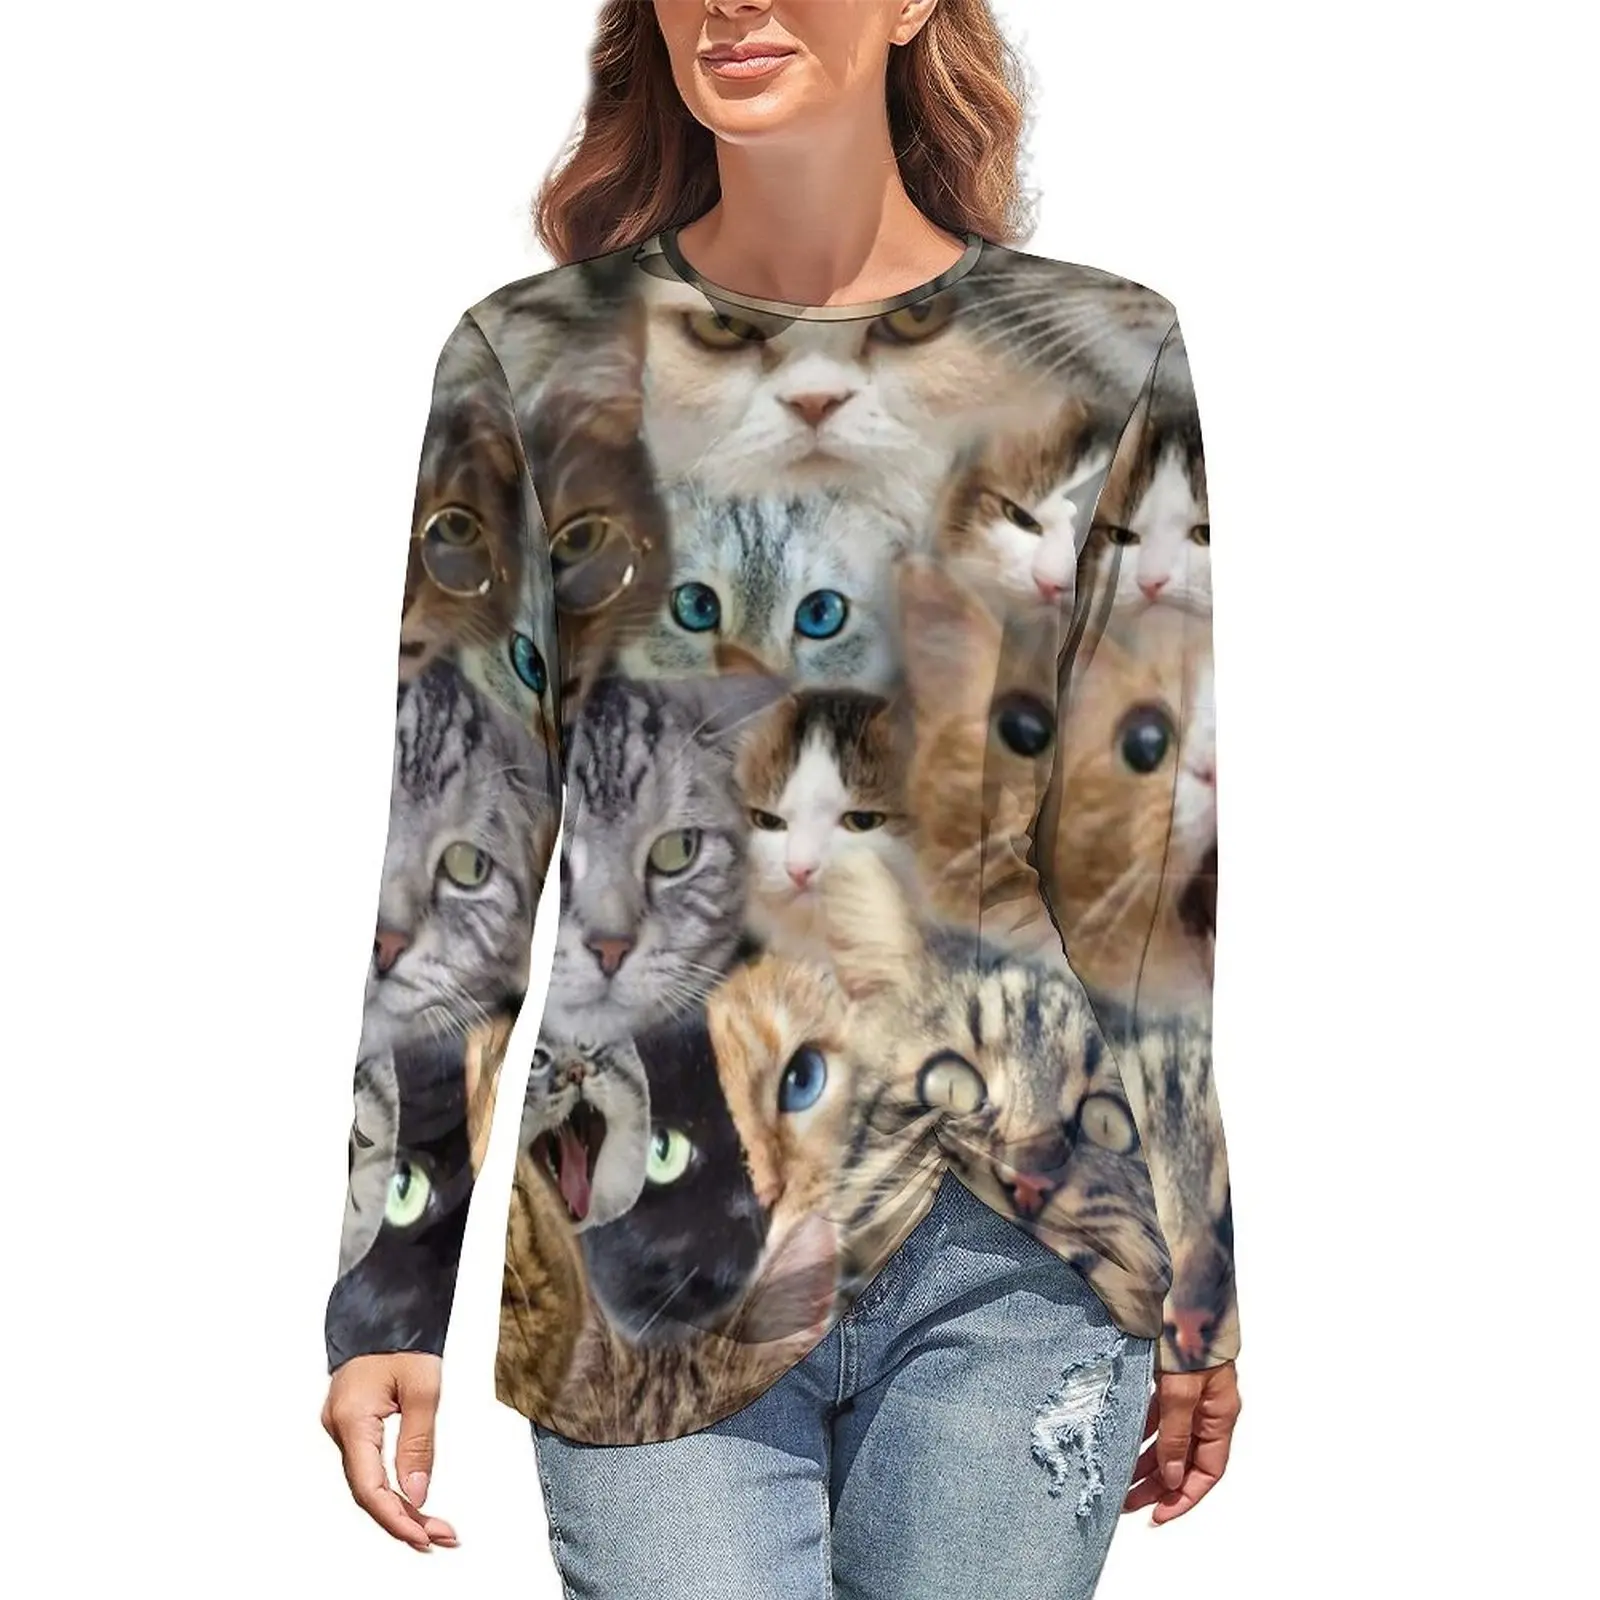 

Cute Cat Collage T-Shirts Many Faces Of Cats Animal Print Korean Fashion Long Sleeve T Shirt Cute Tee Shirt Oversized Clothes